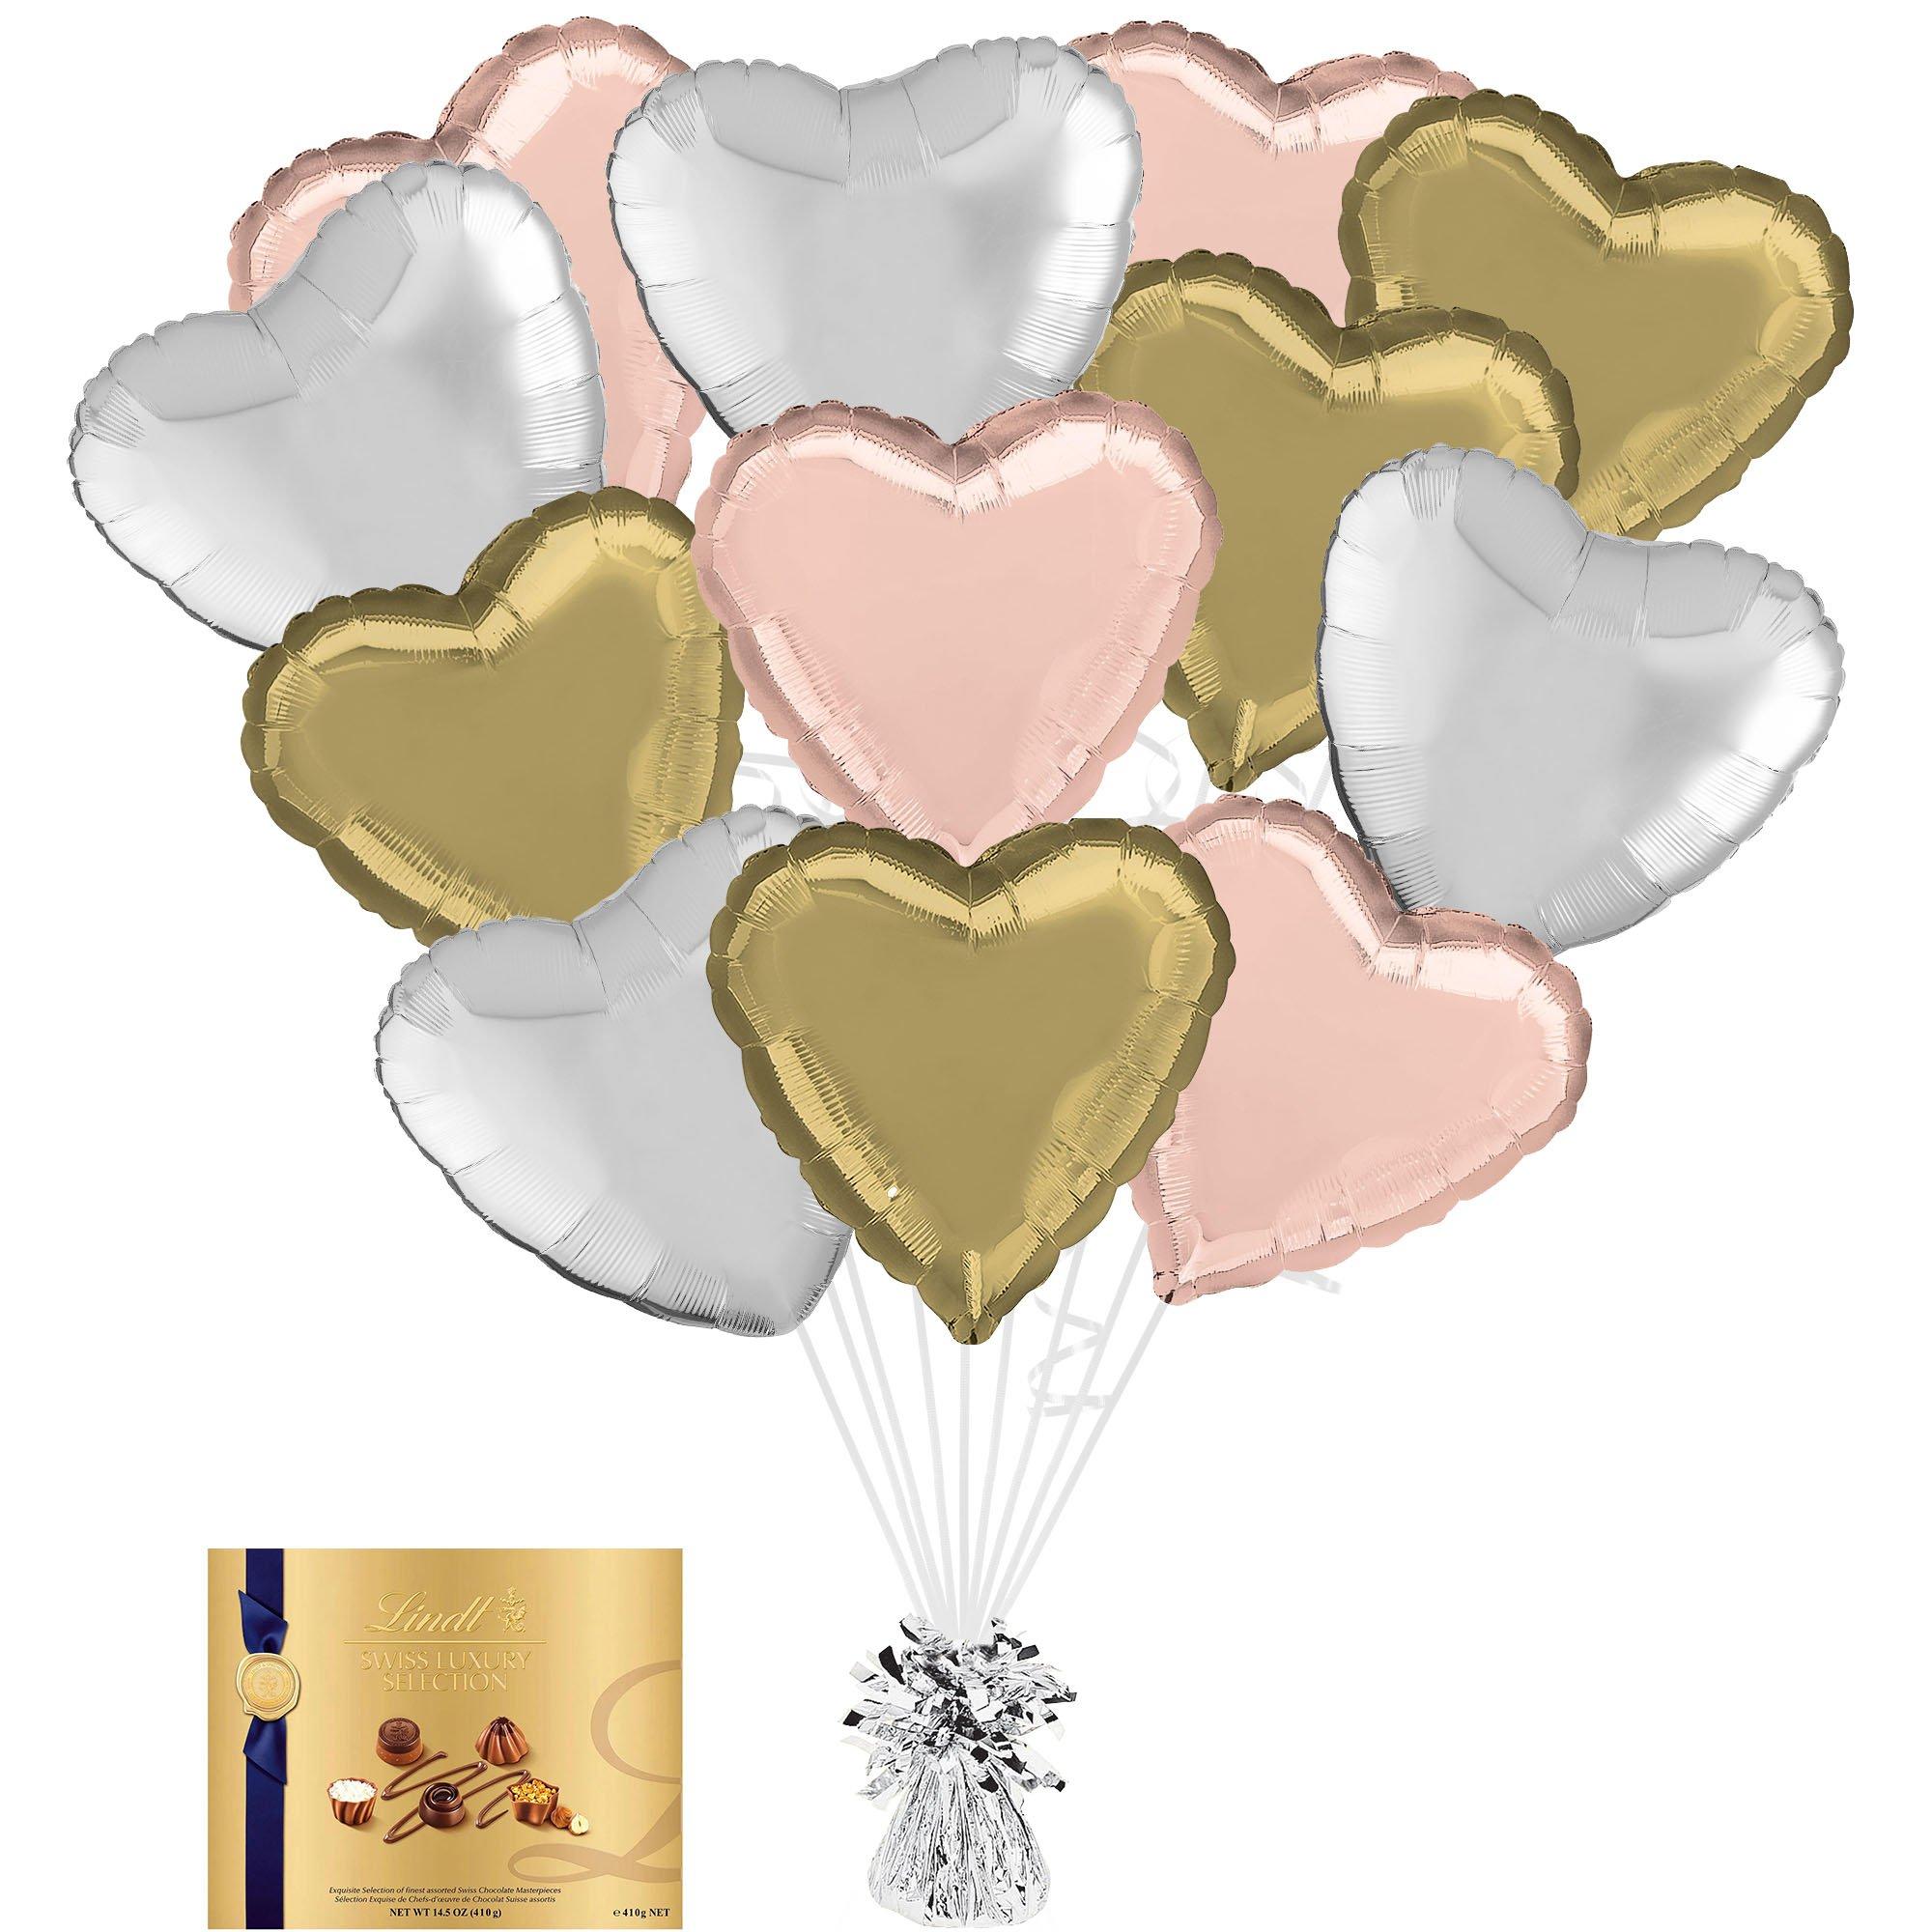 Silver, Gold & Rose Gold Heart Foil Balloon Bouquet with Balloon Weight & Lindt Chocolates - Gift Set